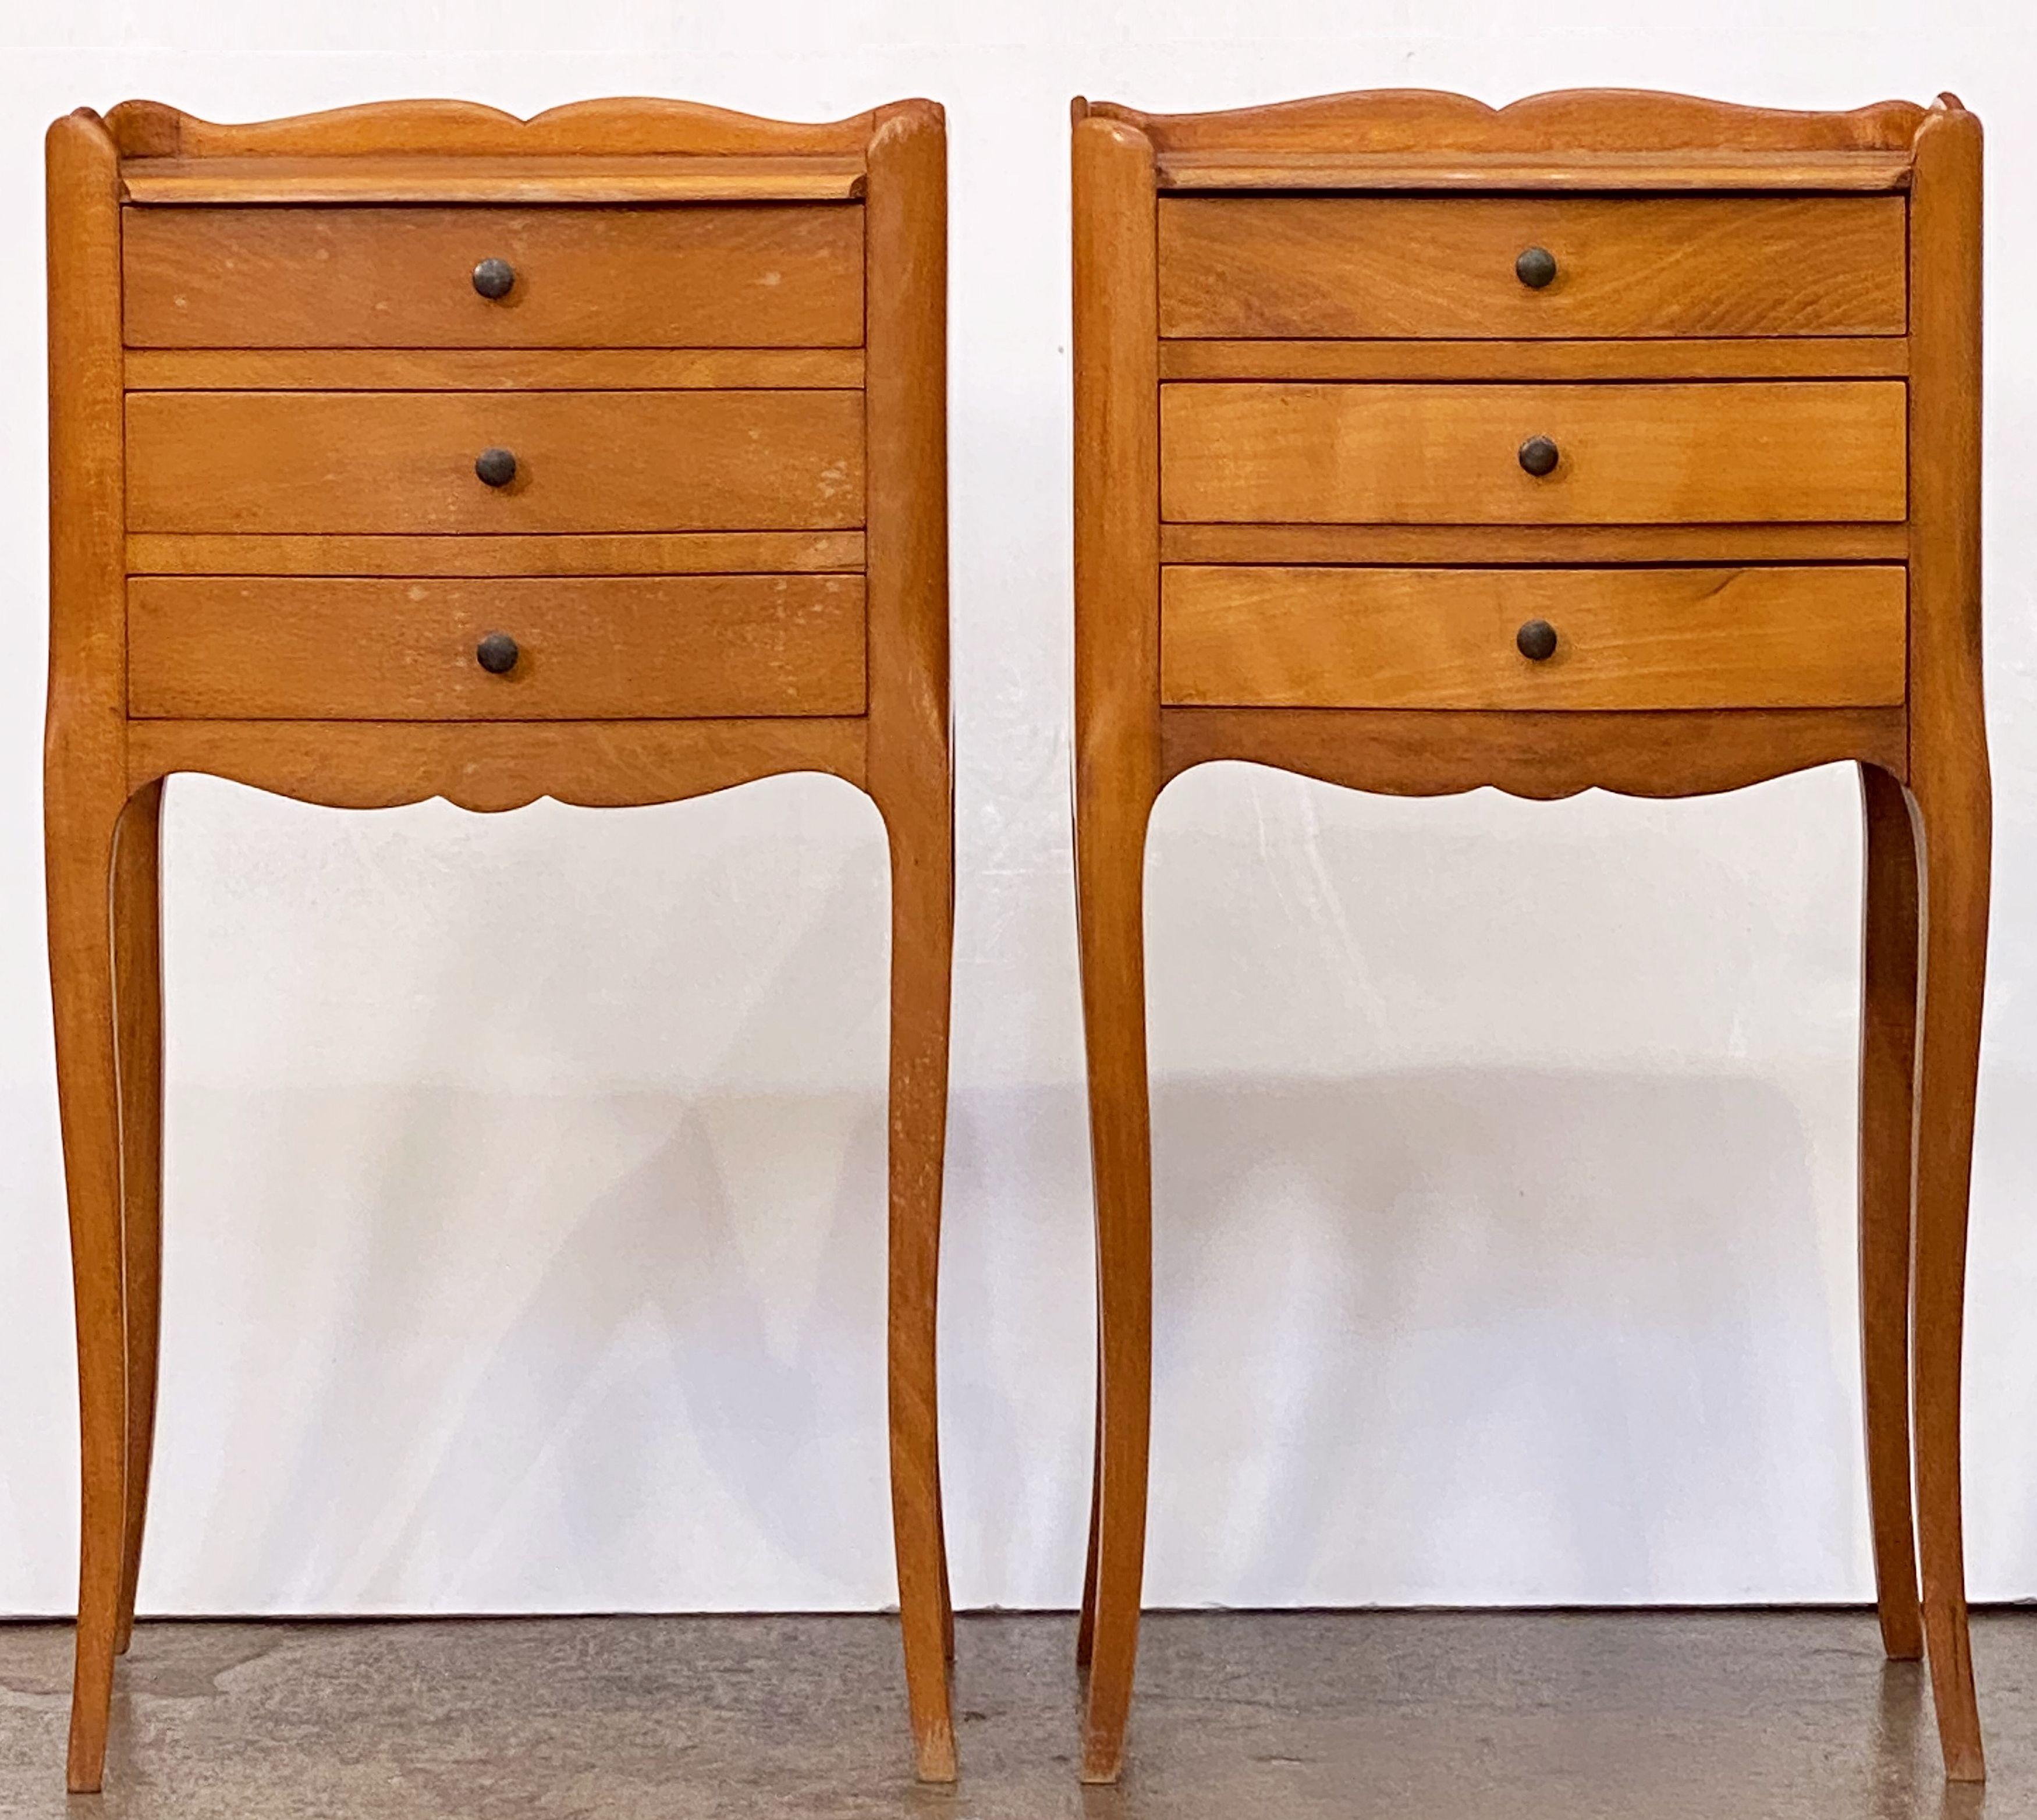 A fine pair of French bedside end tables or nightstands - each Stand featuring a scalloped edge gallery over a frieze of three drawers with brass pulls, apron bottom, and set upon four tapering cabriole legs.

Priced as a pair - $3895 the pair.